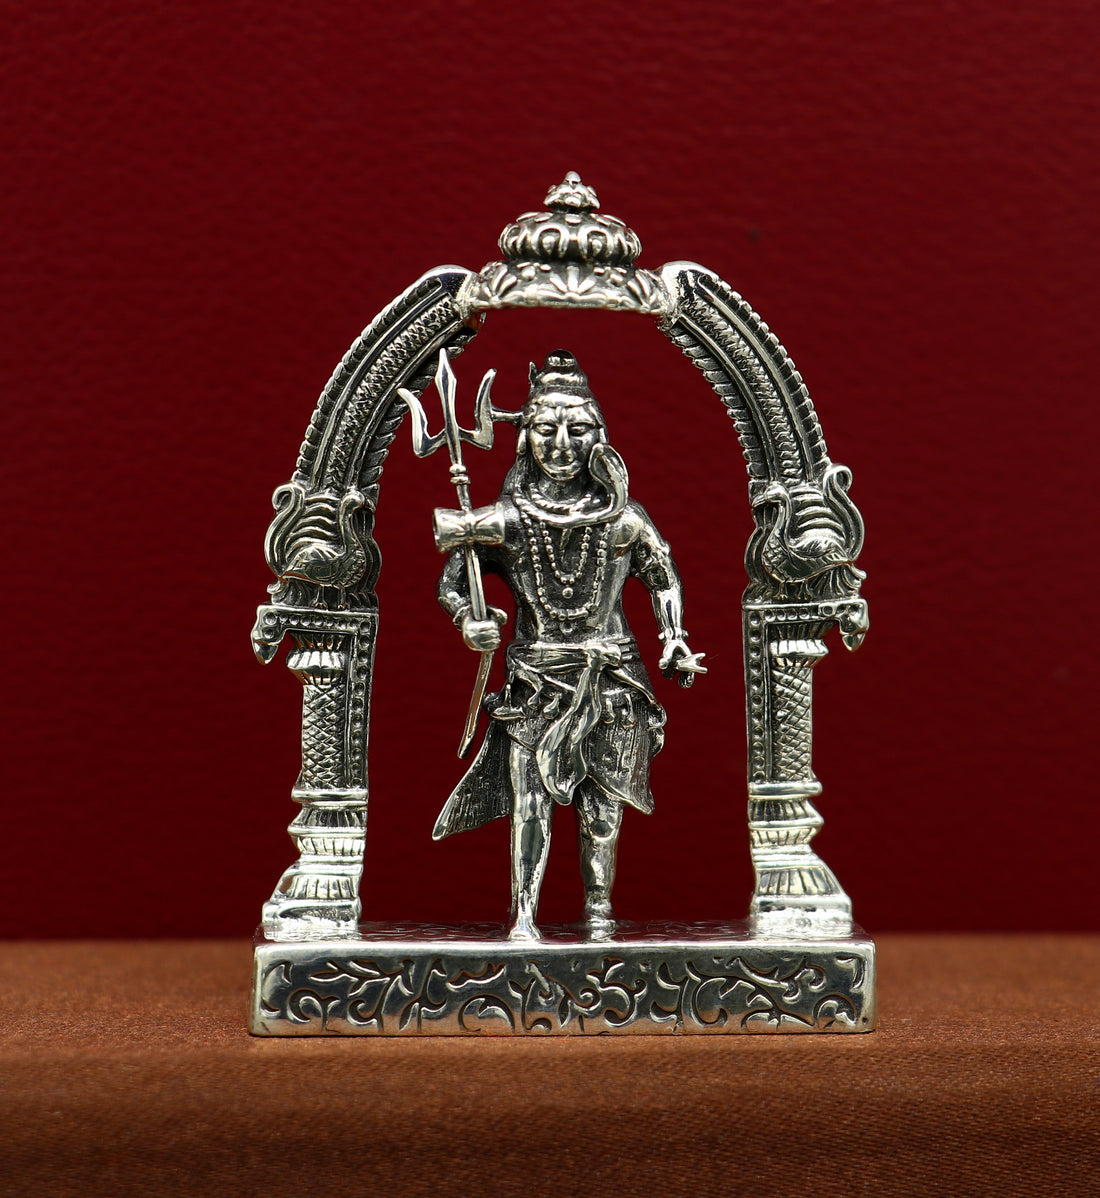 925 Sterling silver handmade vintage look indian hindu idols Lord Shiva with trident stunning statue figurine, puja articles best gift art09 - TRIBAL ORNAMENTS